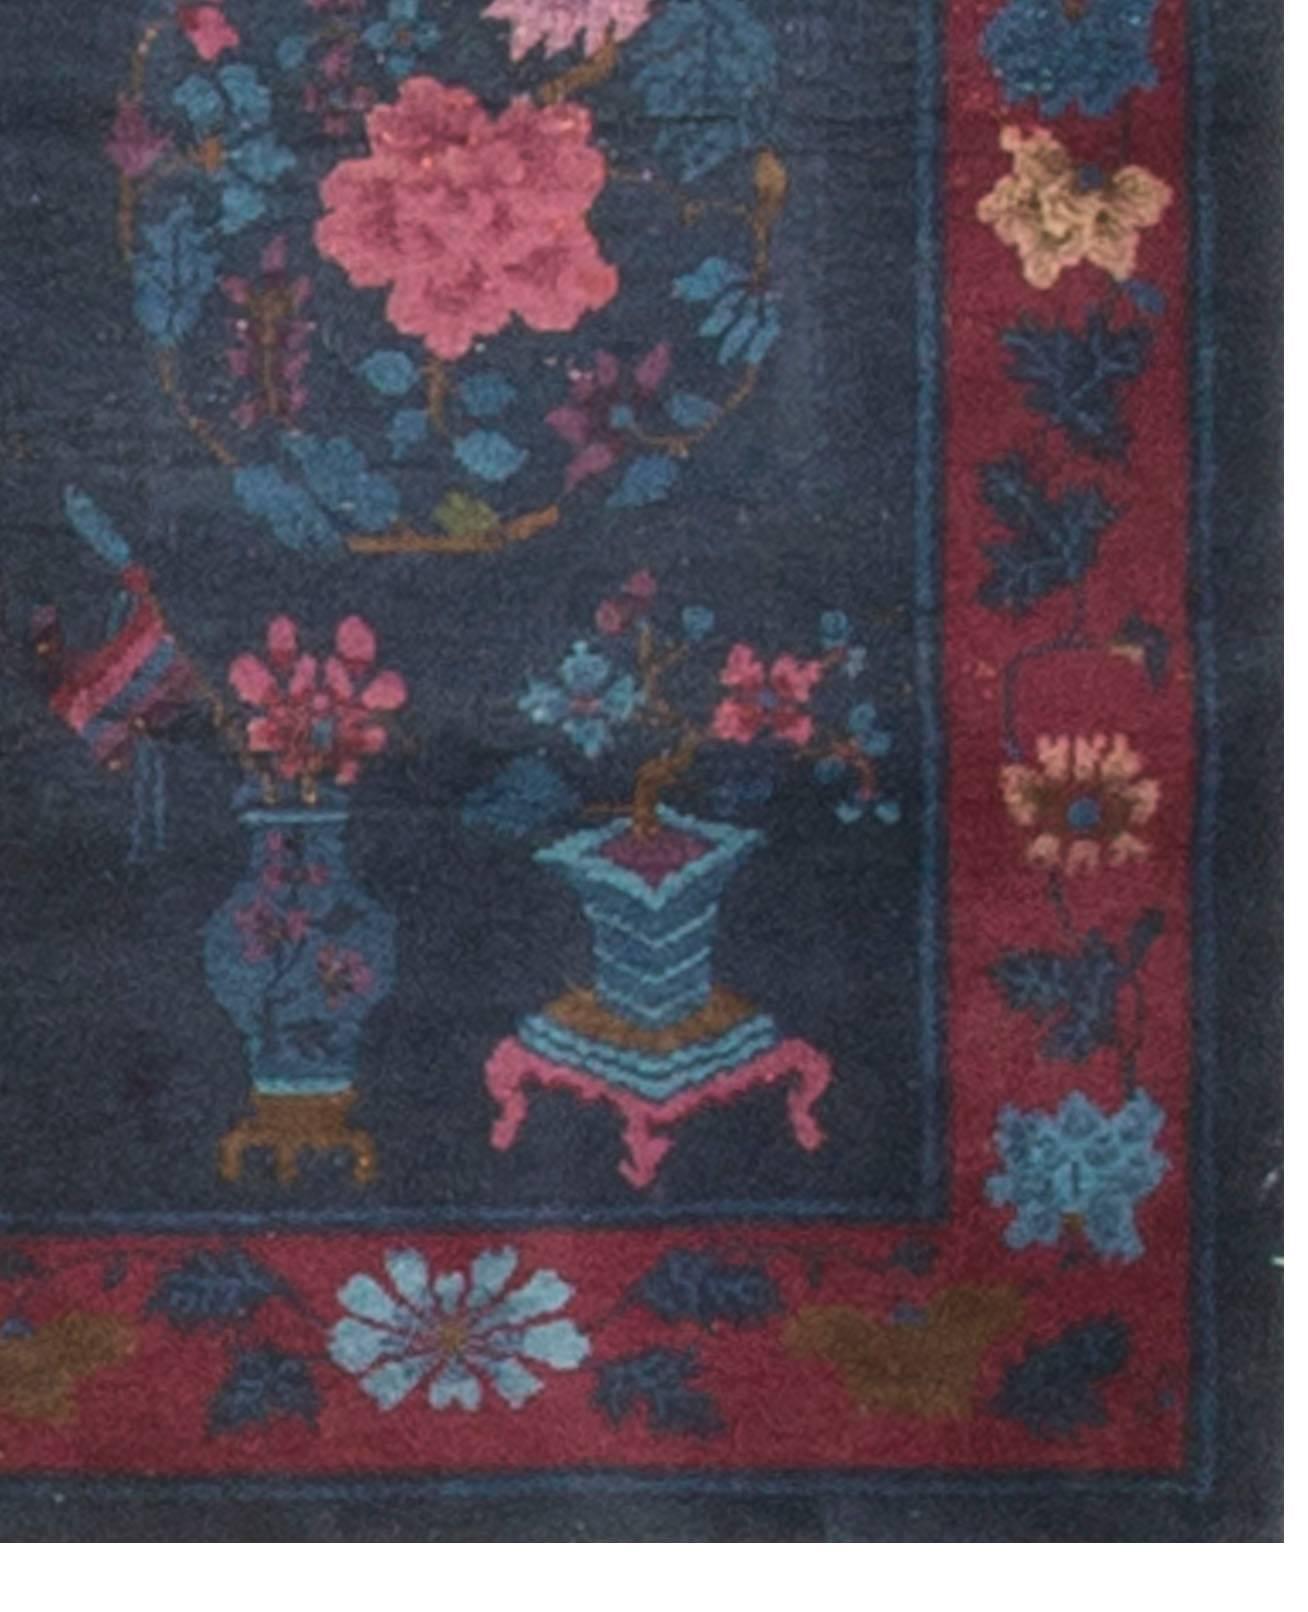 An unusual design in this 1950s Chinese rug. The two urns holding flowers are repeated in mirror image at both ends of the rug with a circular globe pattern in the center with beautiful floral designs. The main border surrounded by the blues in the